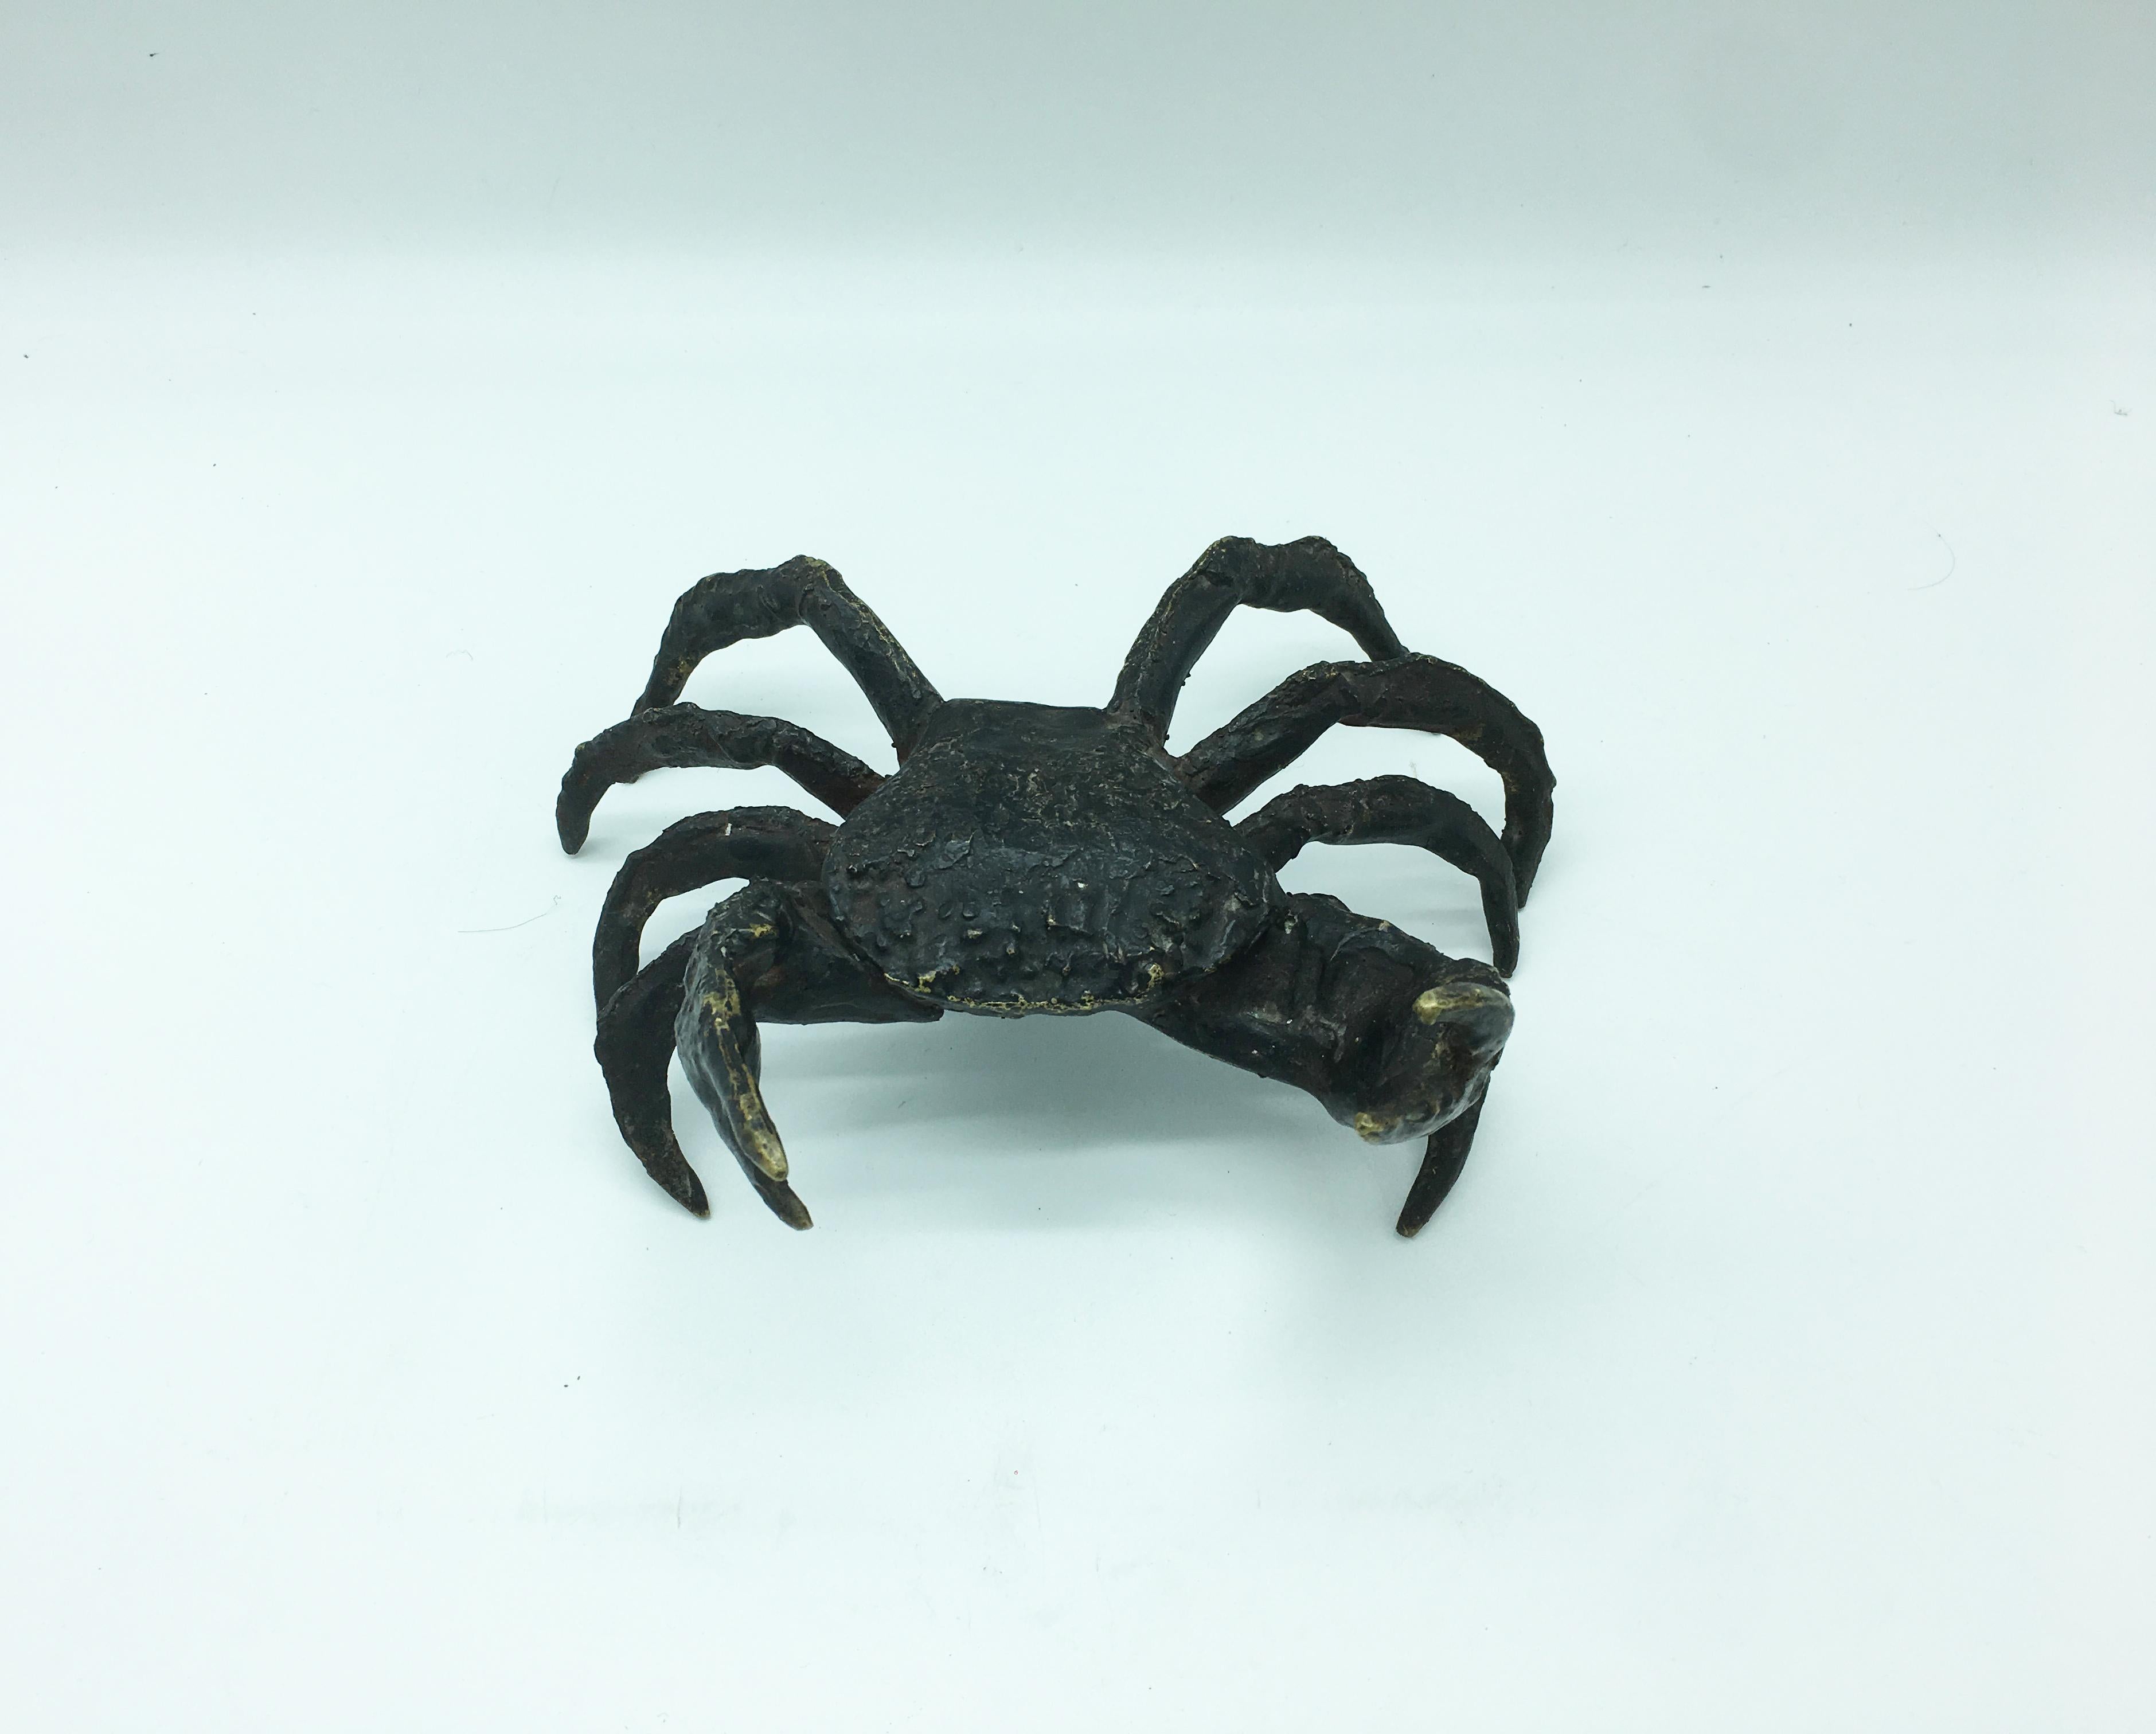 Italian life-size bronze crab. Antique Neapolitan crab in patinated bronze, Italy, early 20th century.